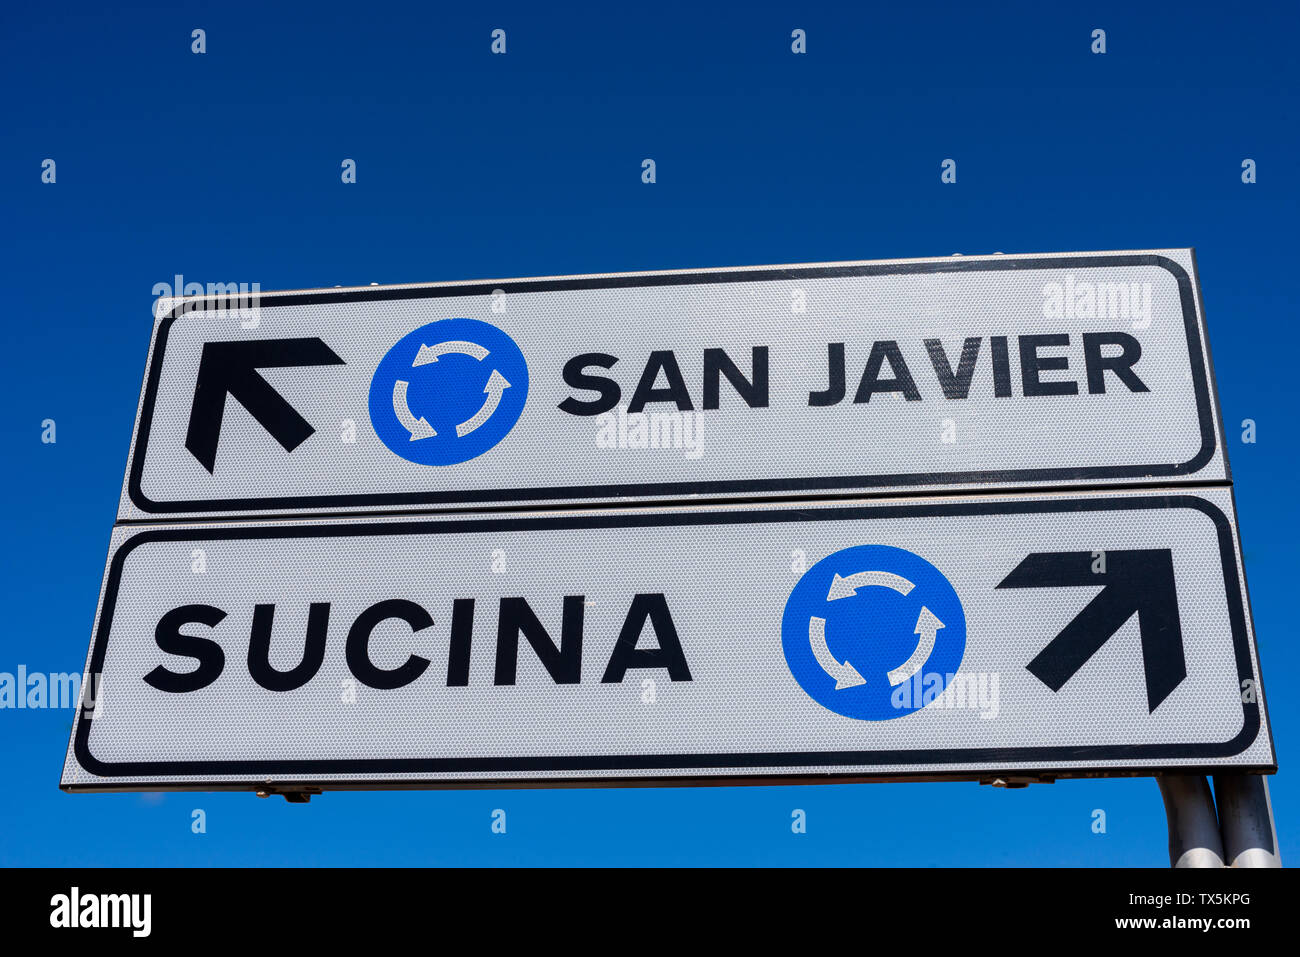 Road sign on roundabout with directions to San Javier and Sucina. Blue sky. Direction arrow. Directions arrows Stock Photo